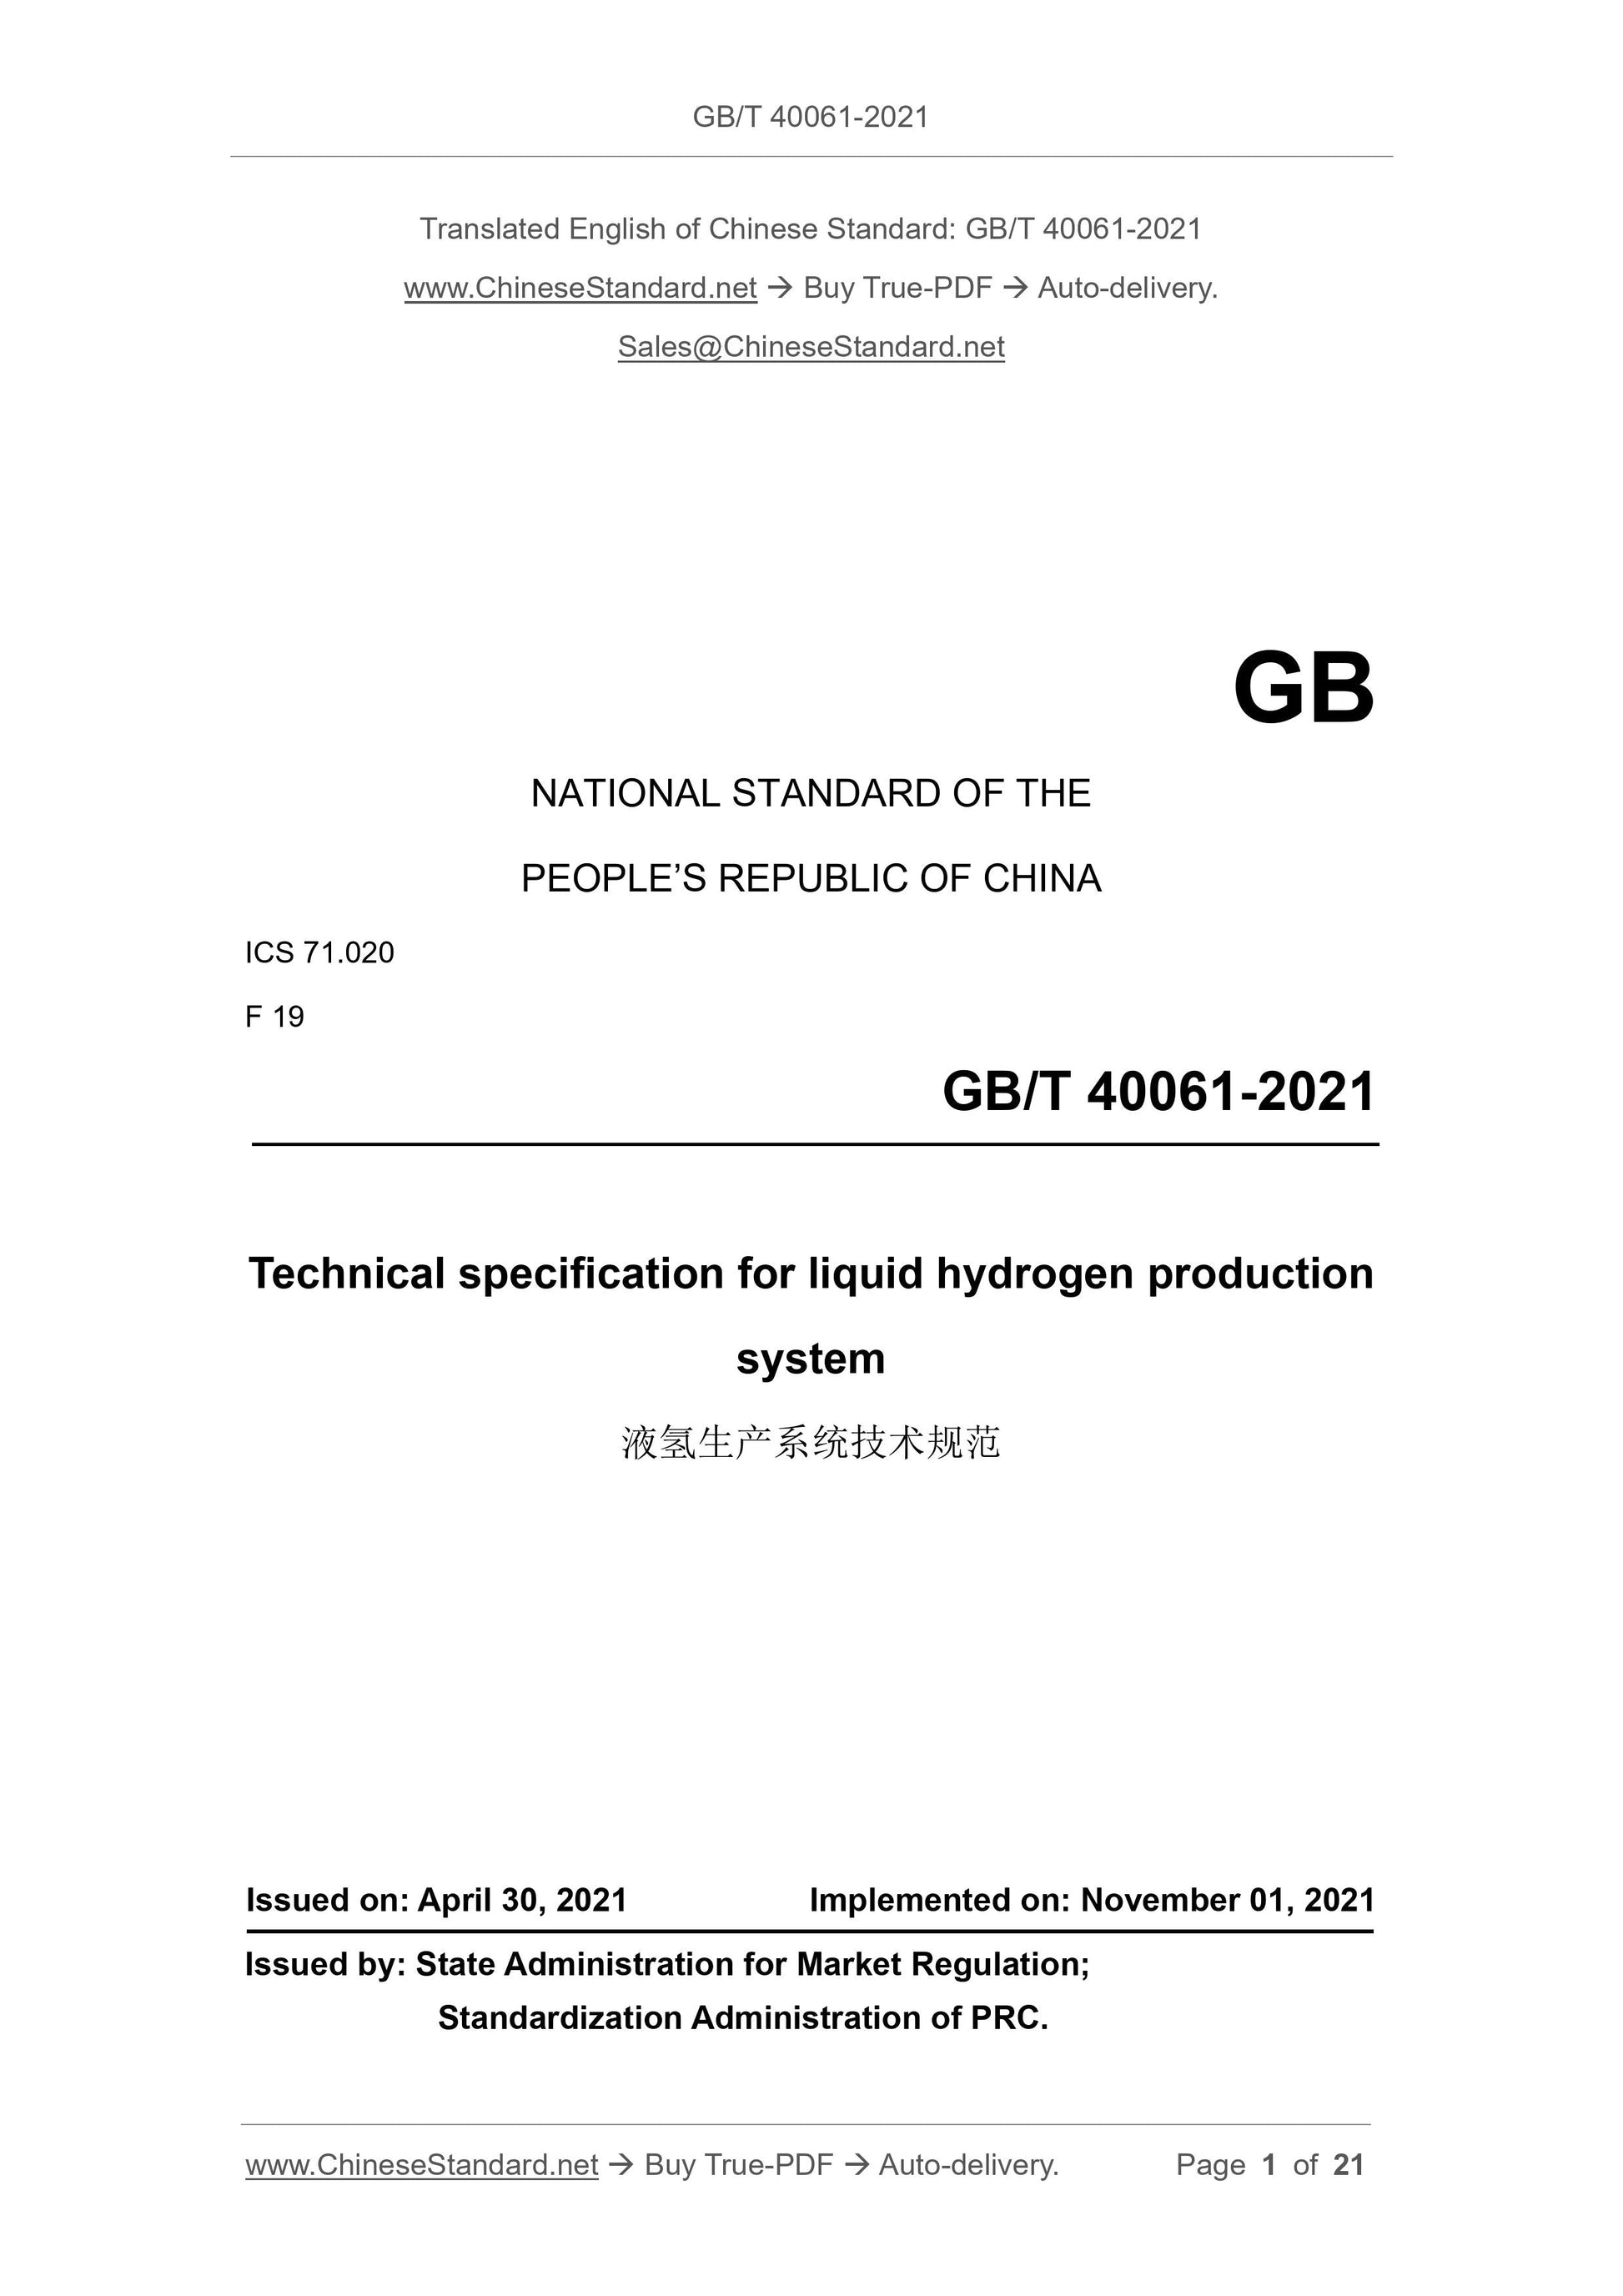 GB/T 40061-2021 Page 1